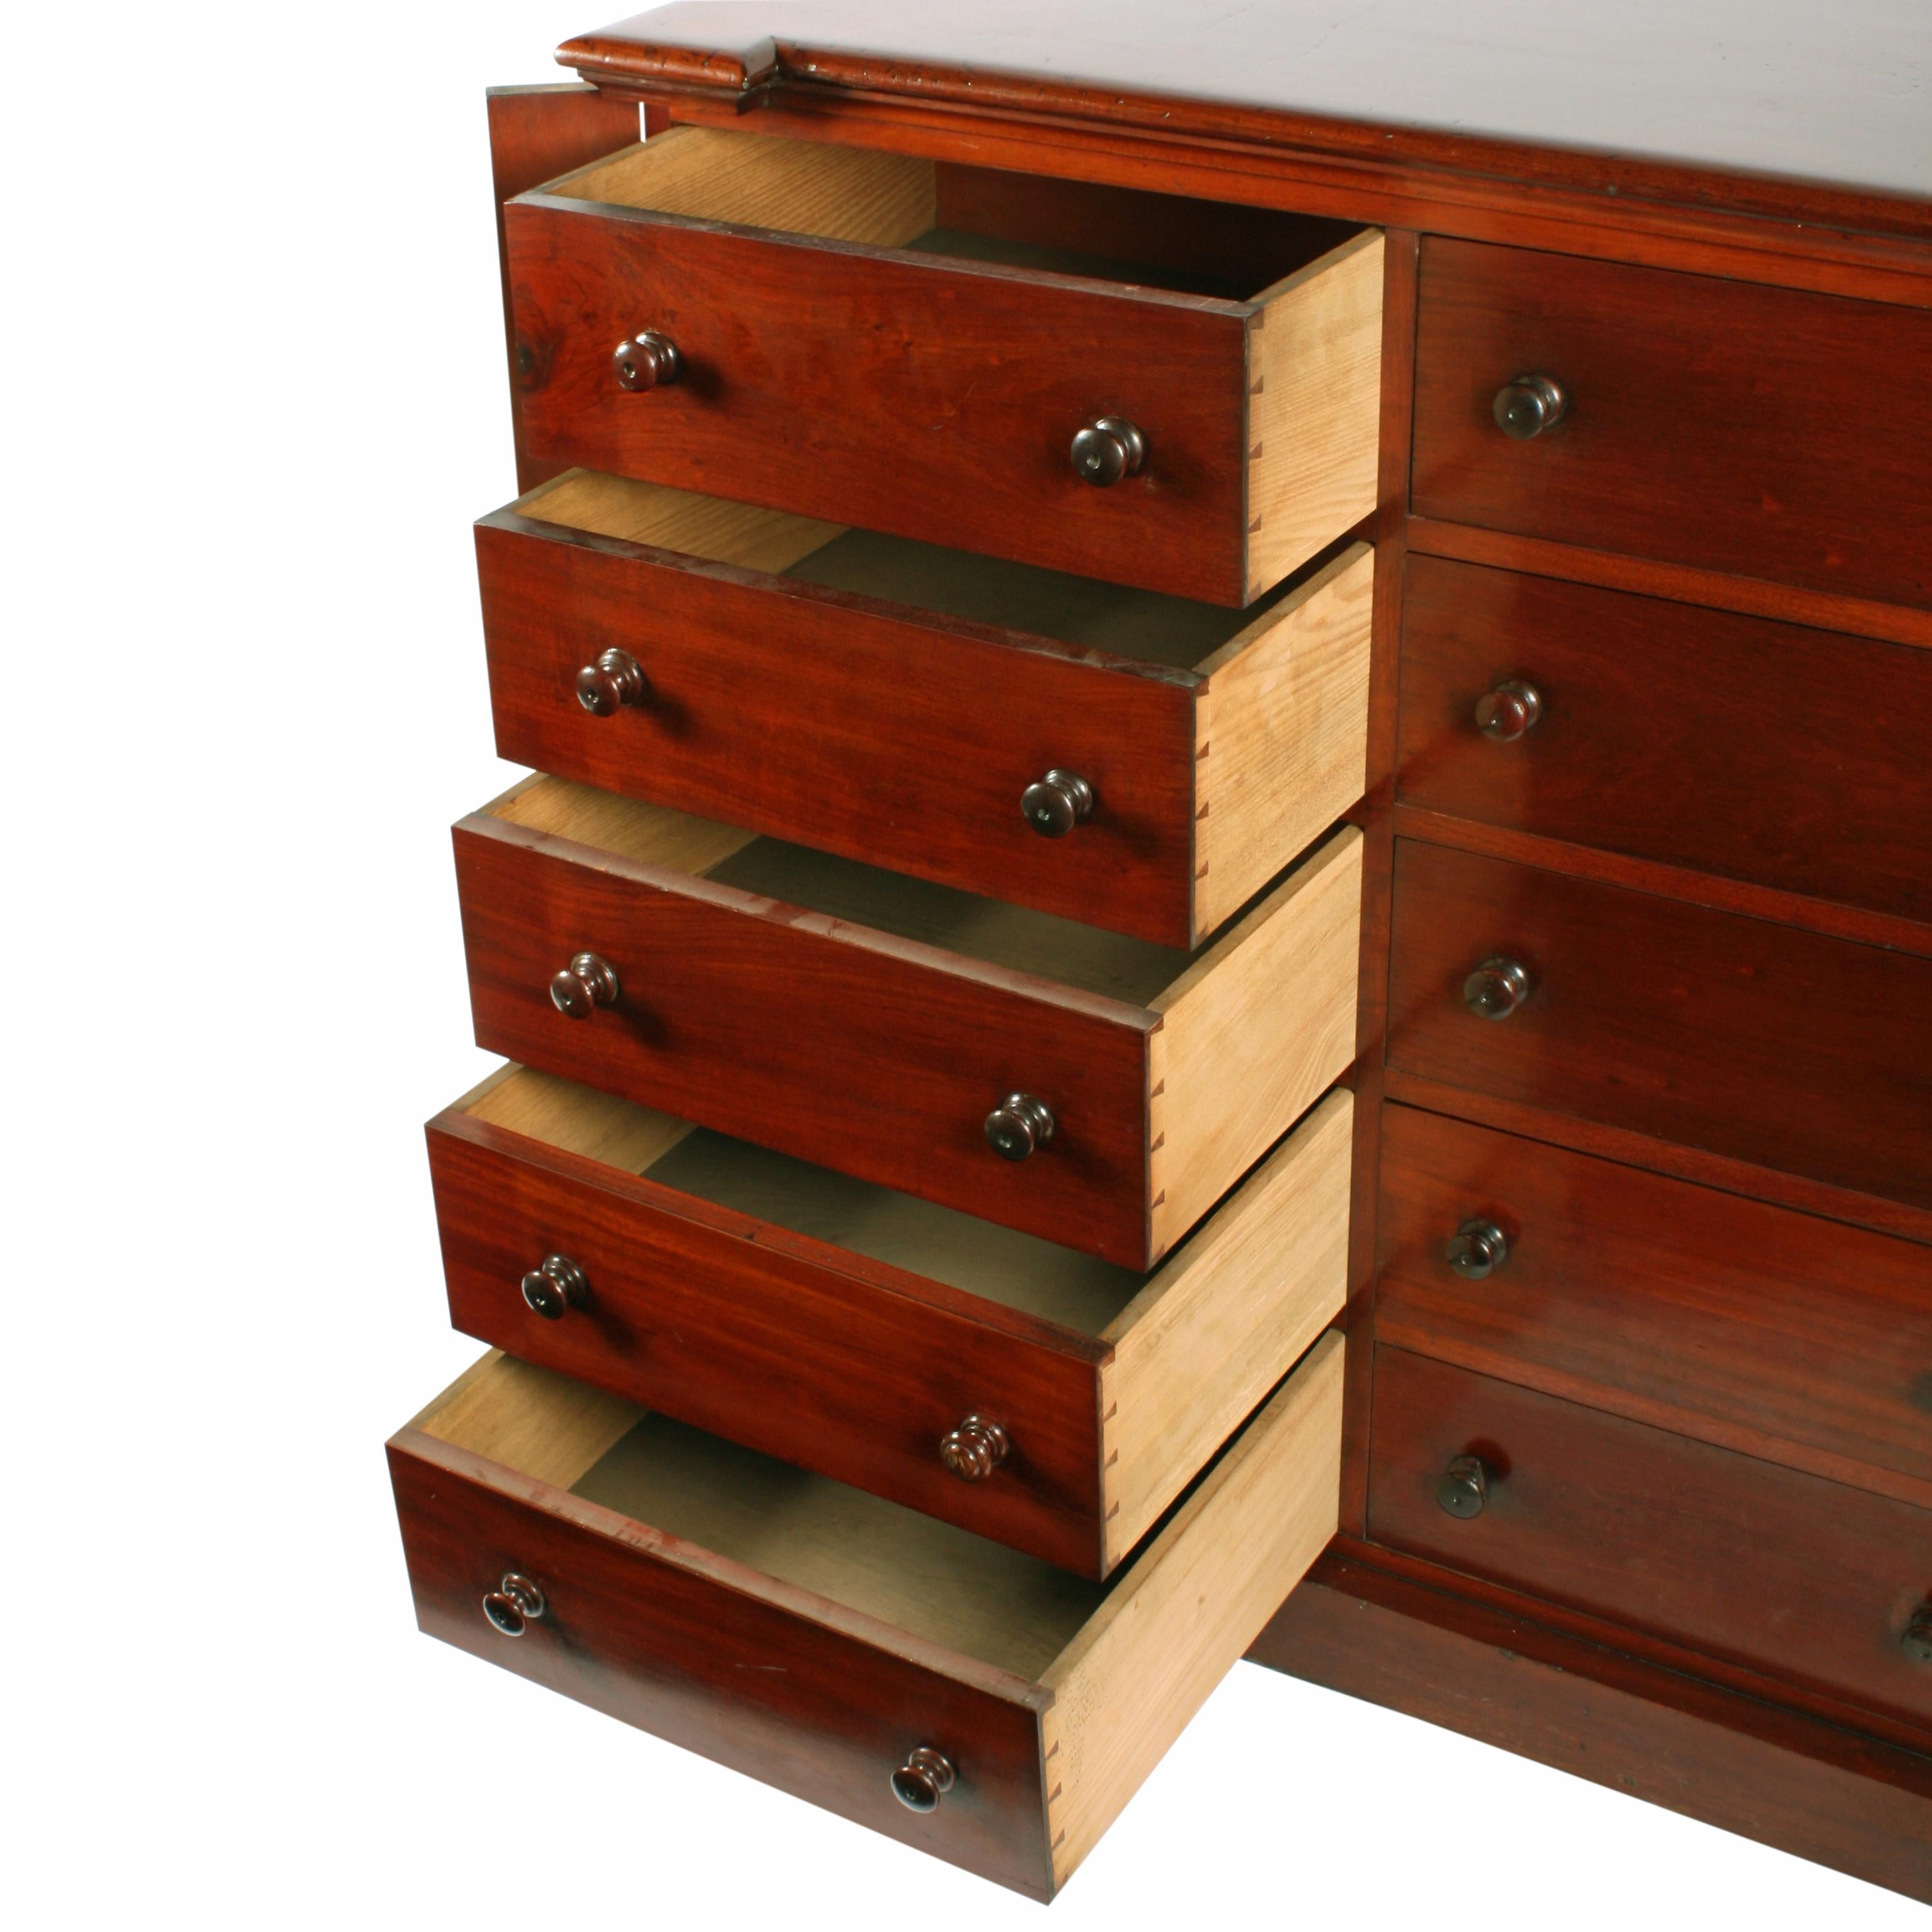 Victorian double Wellington chest.


An unusual Victorian mahogany double Wellington chest.

The chest has a double row of five drawers with mahogany drawer fronts, ashwood linings and turned mahogany knob handles.

The drawers have a locking